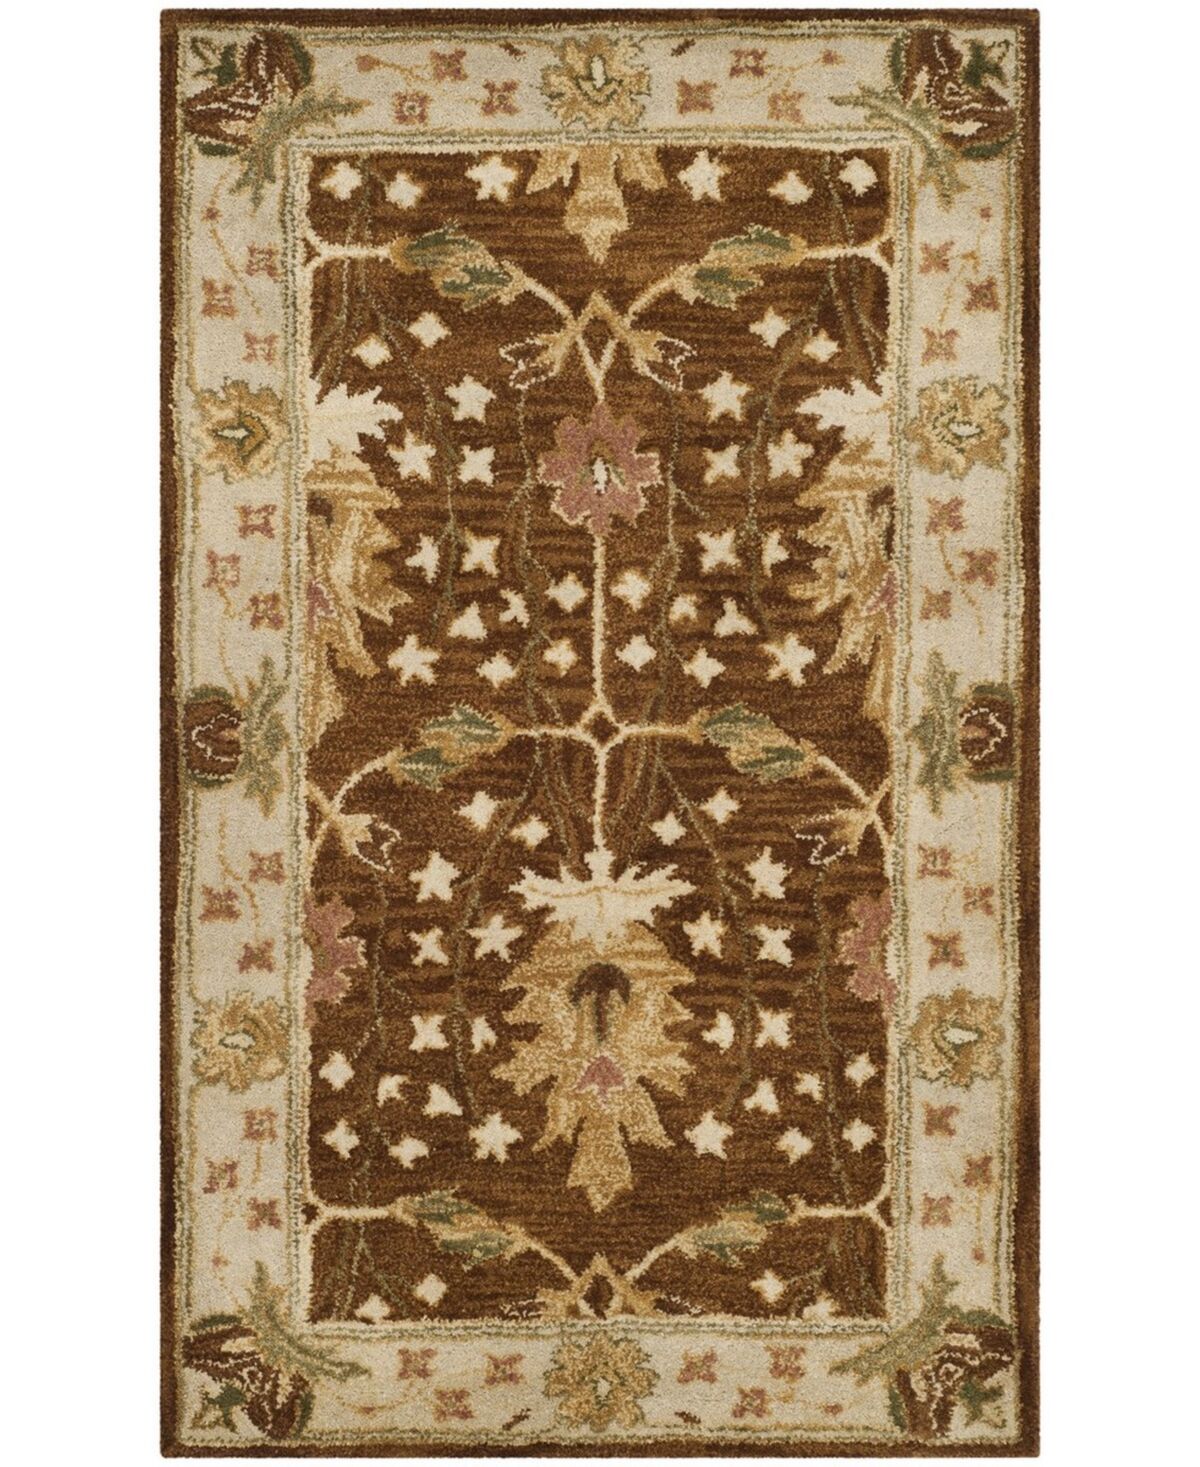 Safavieh Antiquity At840 Brown 4' x 6' Area Rug - Brown